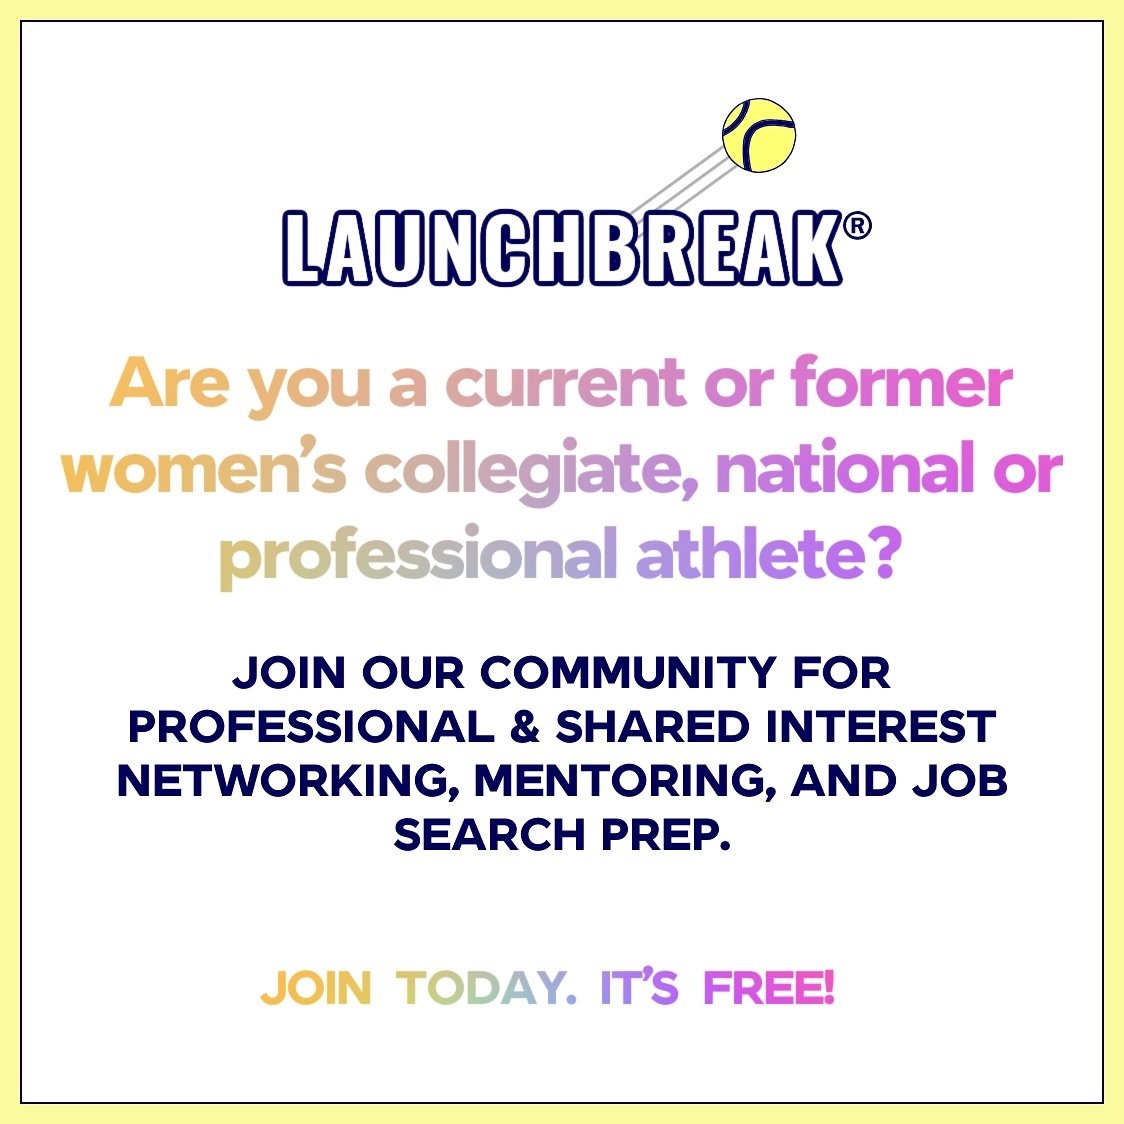 LaunchBreak is growing rapidly with members representing 30+ sports. Our members span all generations and are in all stages of their careers. Link in profile to join for free today.

Please tag your teammates!

#womensupportingwomen 
#NoMoreCeilings
